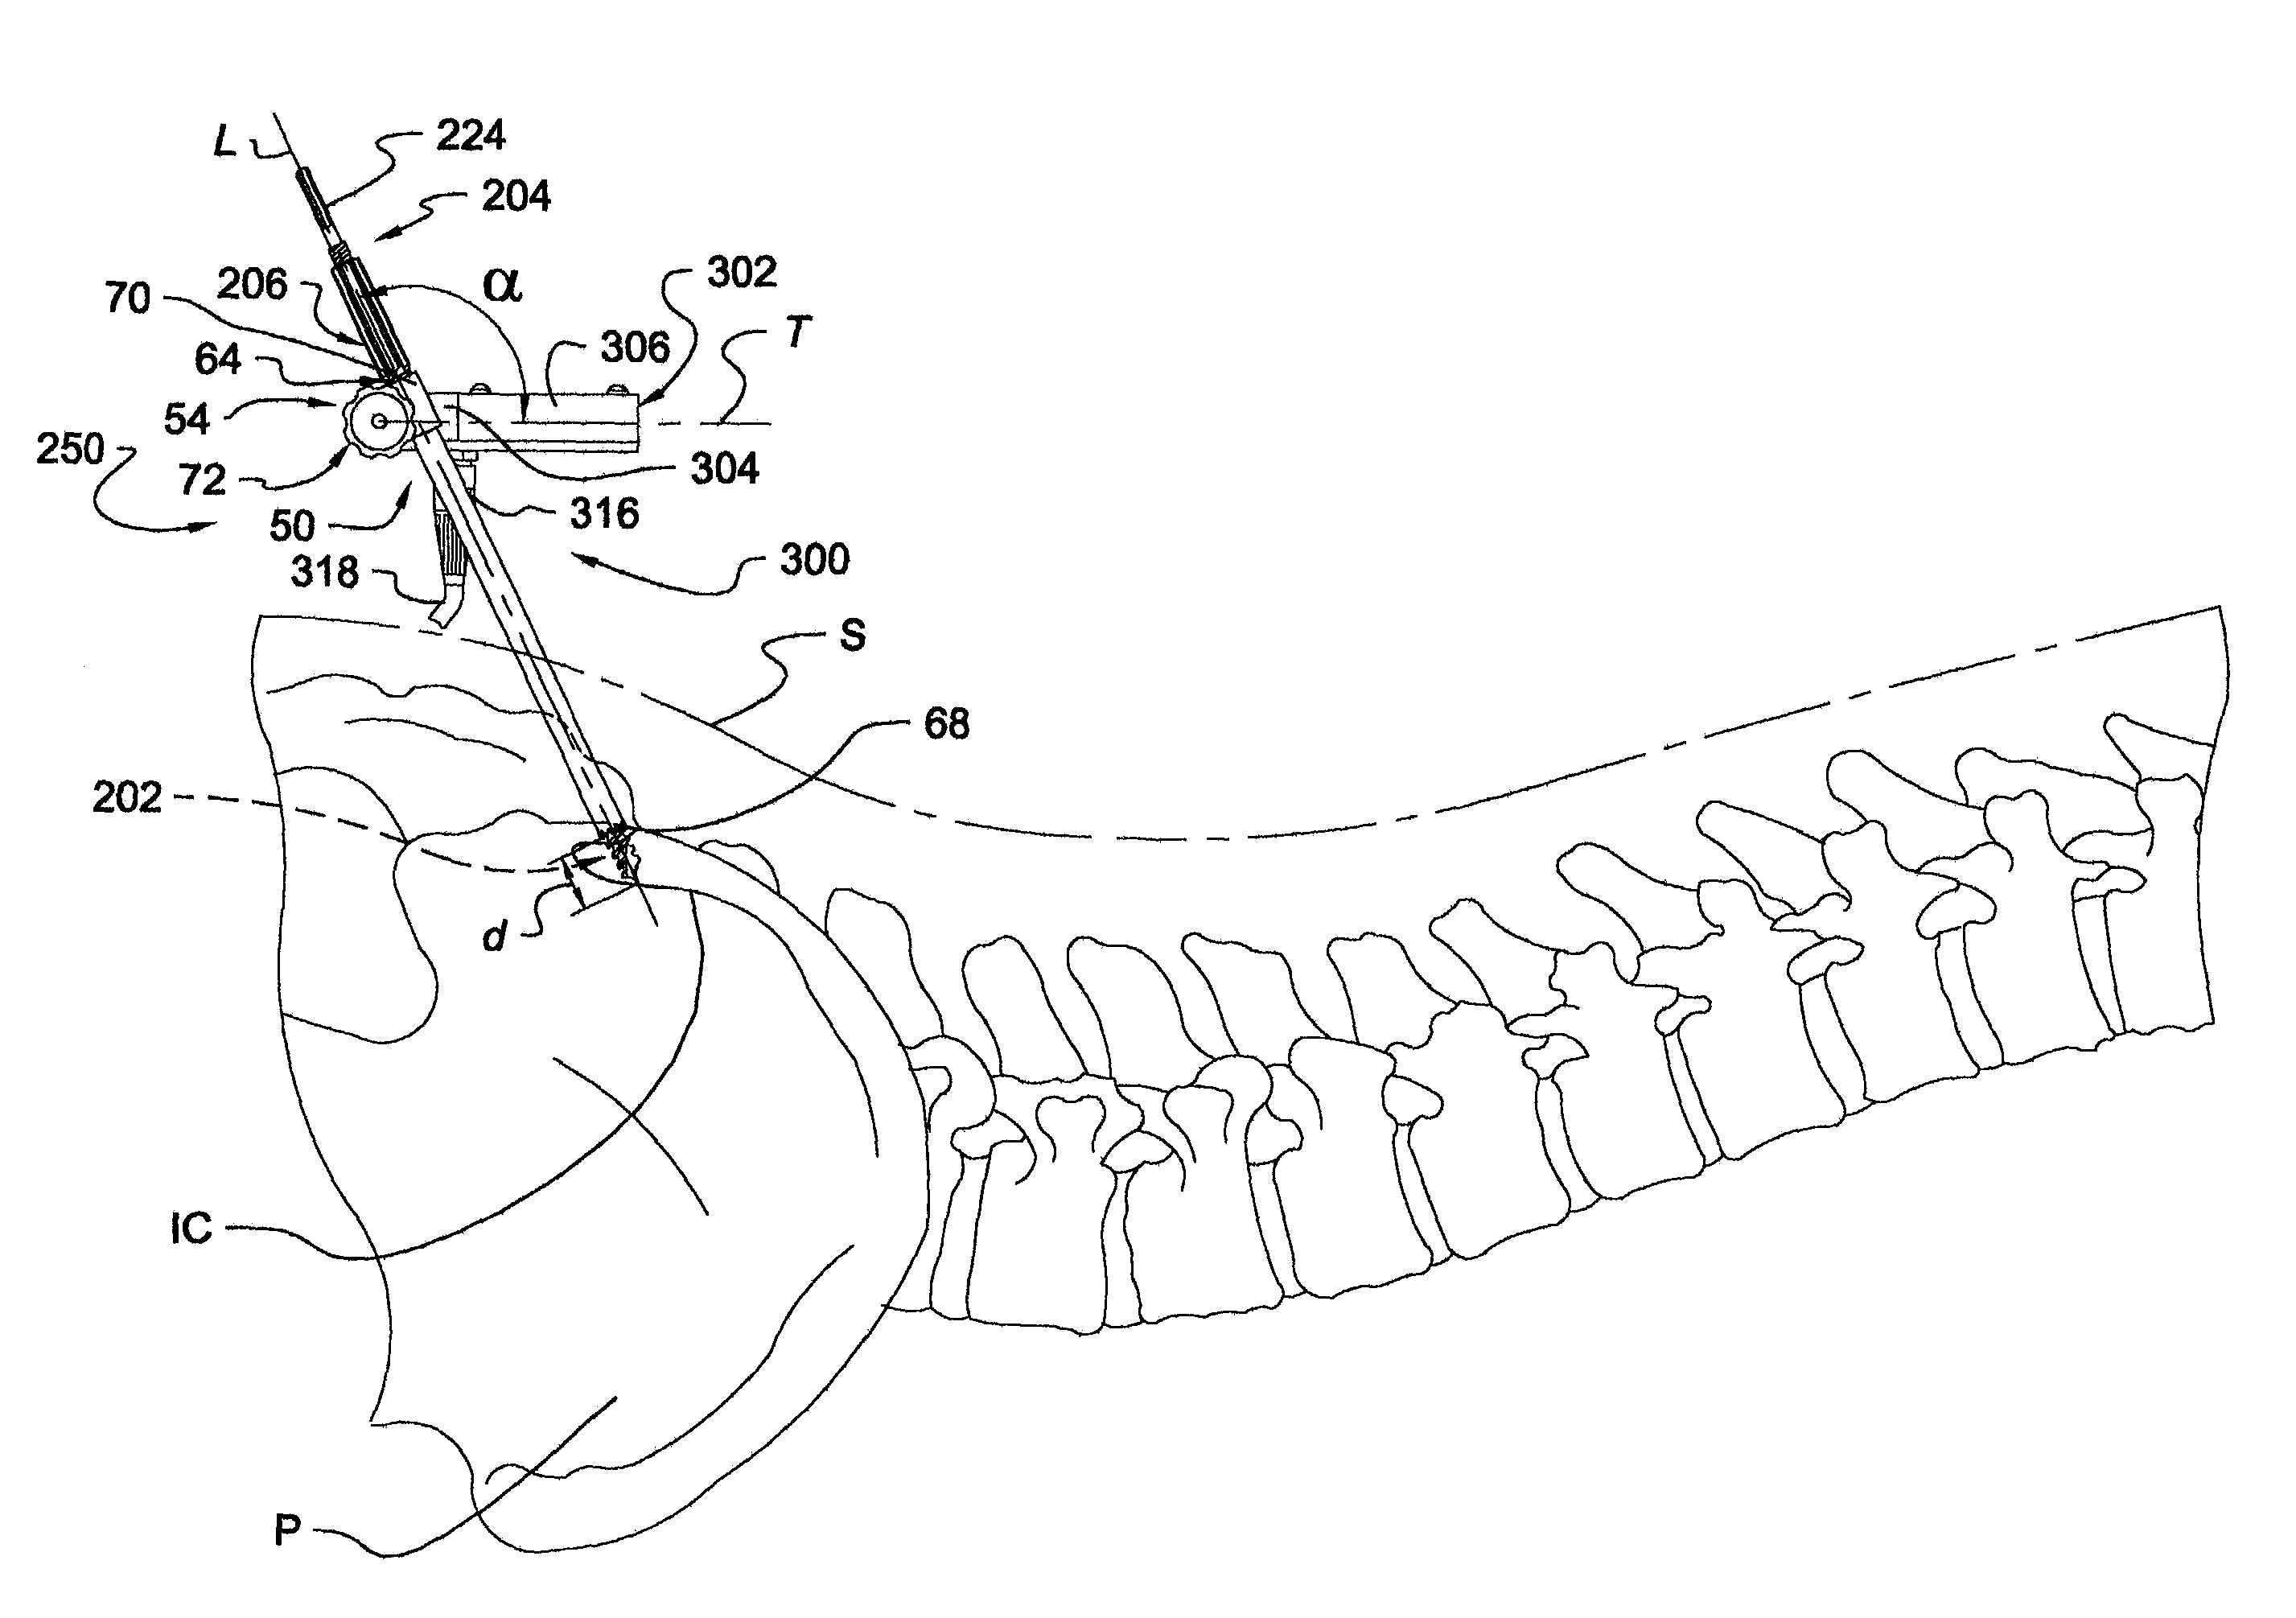 Instrumentation and method for mounting a surgical navigation reference device to a patient